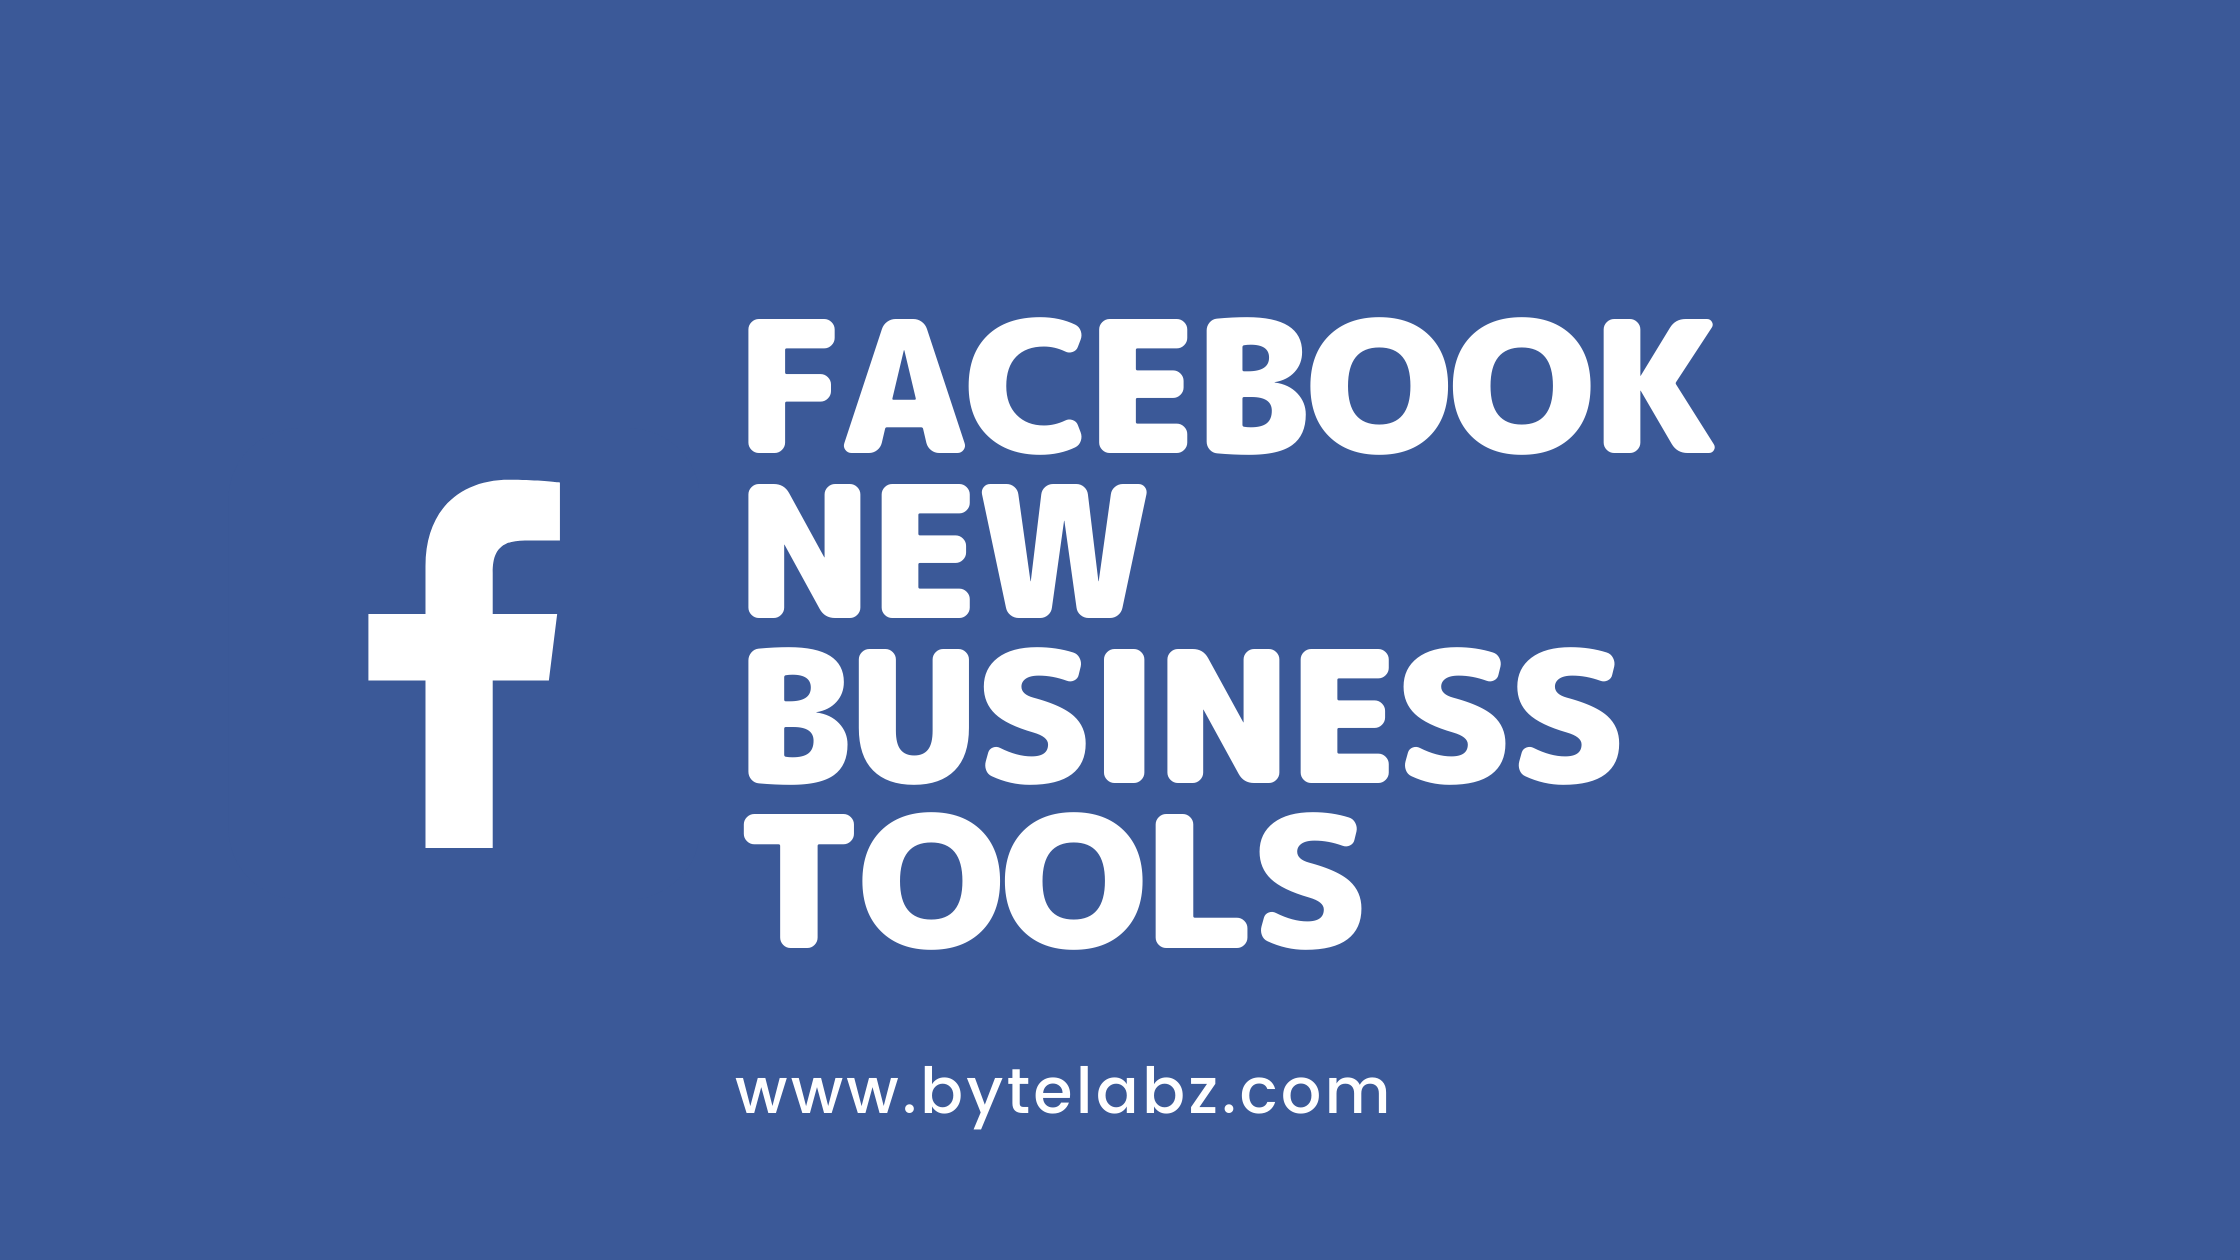 Facebook new business tools to grow your business